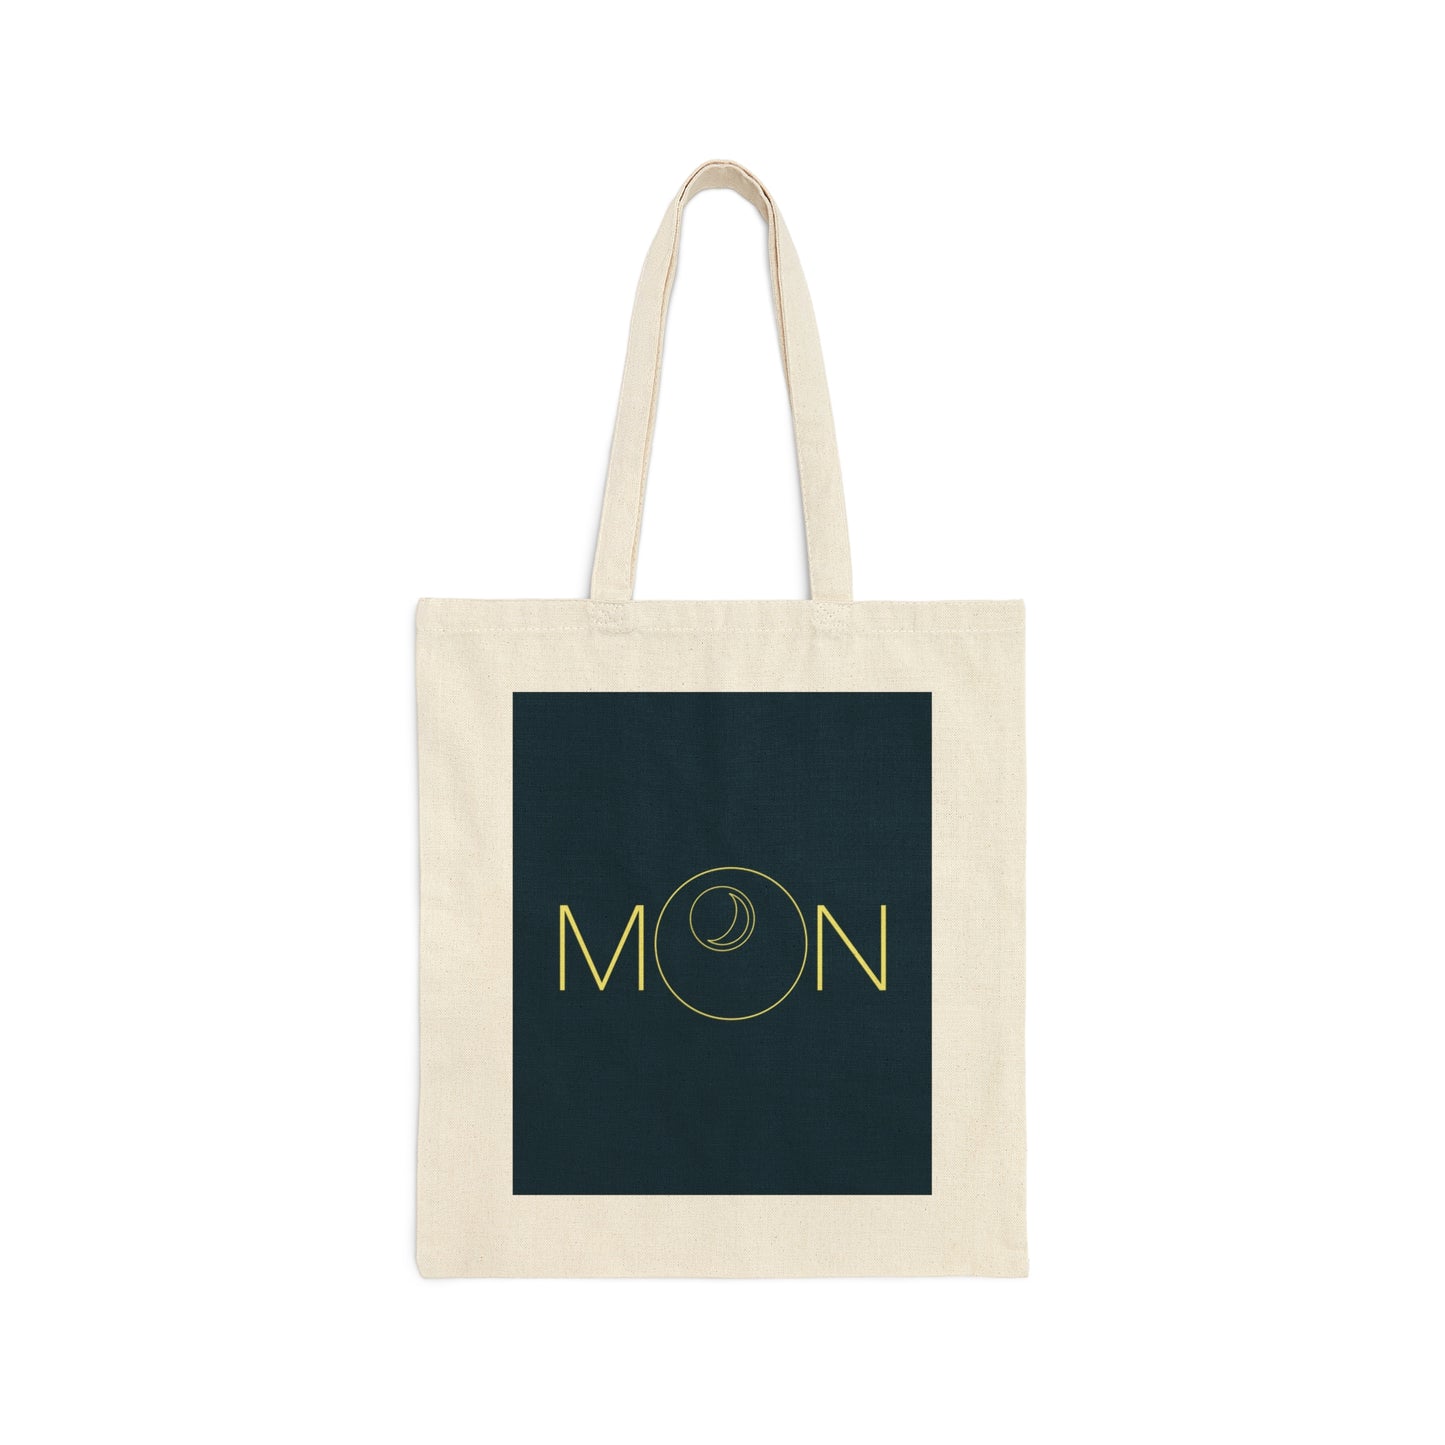 Moon Aesthetic Typography Graphic Drawing Art Canvas Shopping Cotton Tote Bag